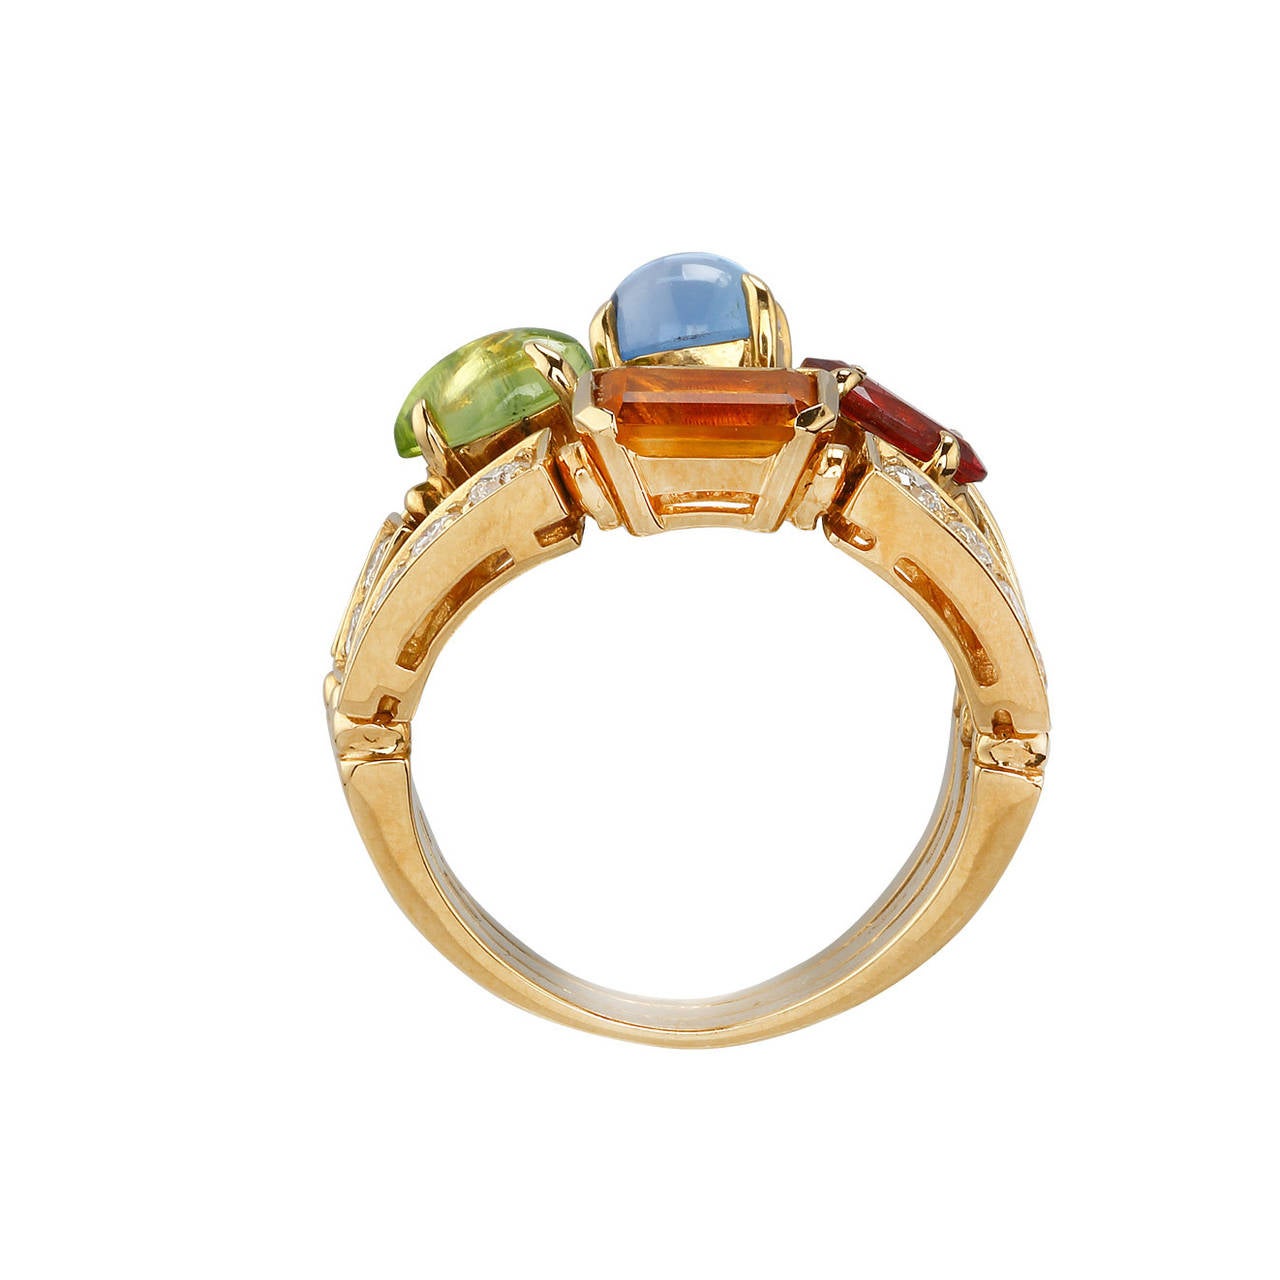 If you are looking for a ring that is truly going to shock and awe the crowd, look no further than this amazing Bulgari three band ring. This ring is from the Color Collection. It has been crafted from 18k yellow gold and features gorgeous pave